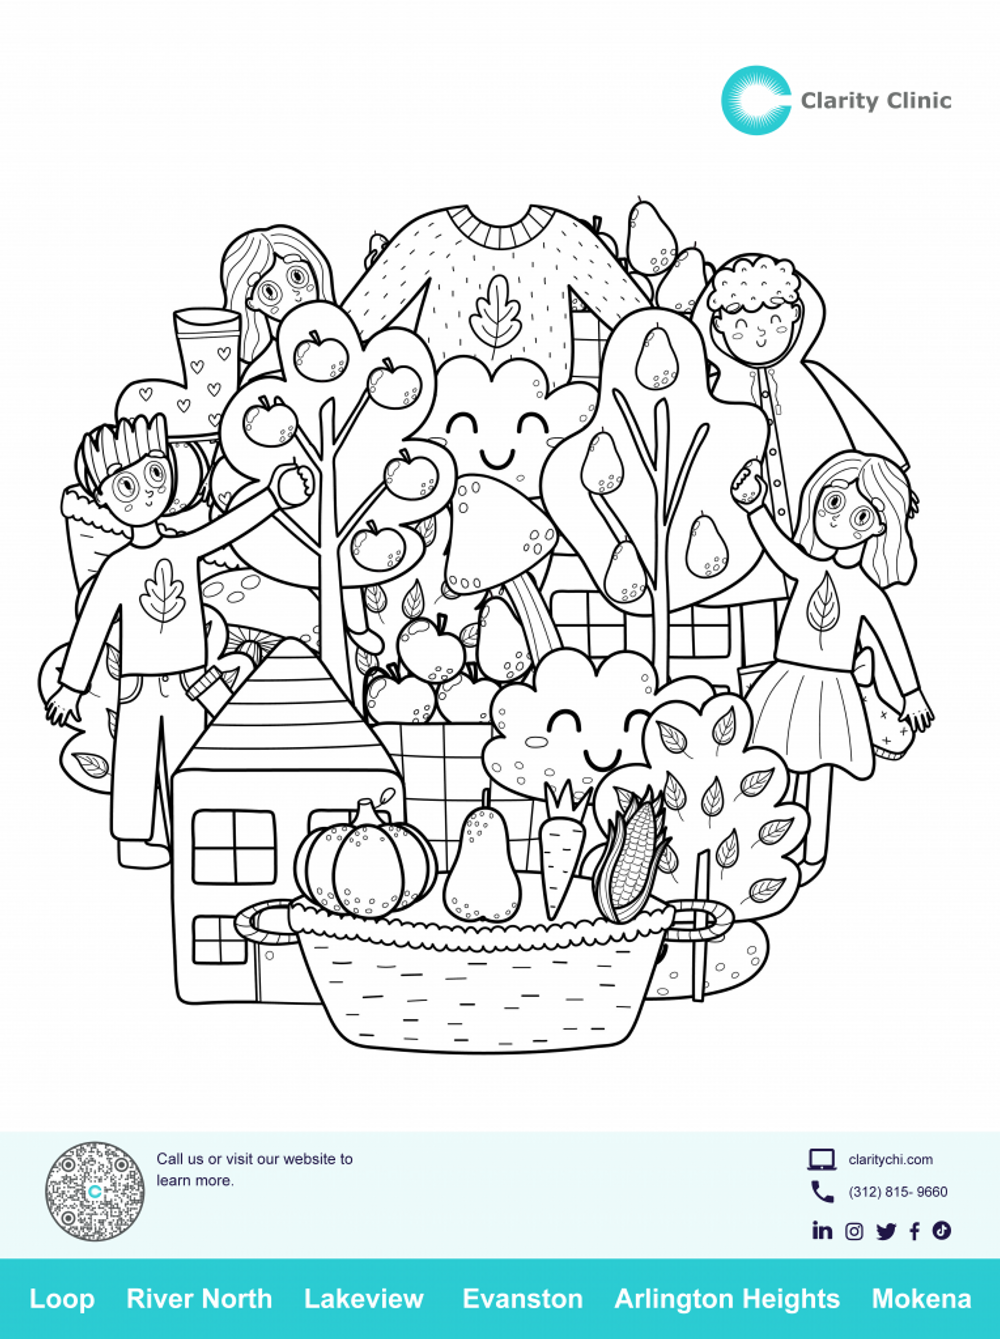 Mental Health and Wellness Blog — 10 Great Websites with Free Adult  Coloring Pages